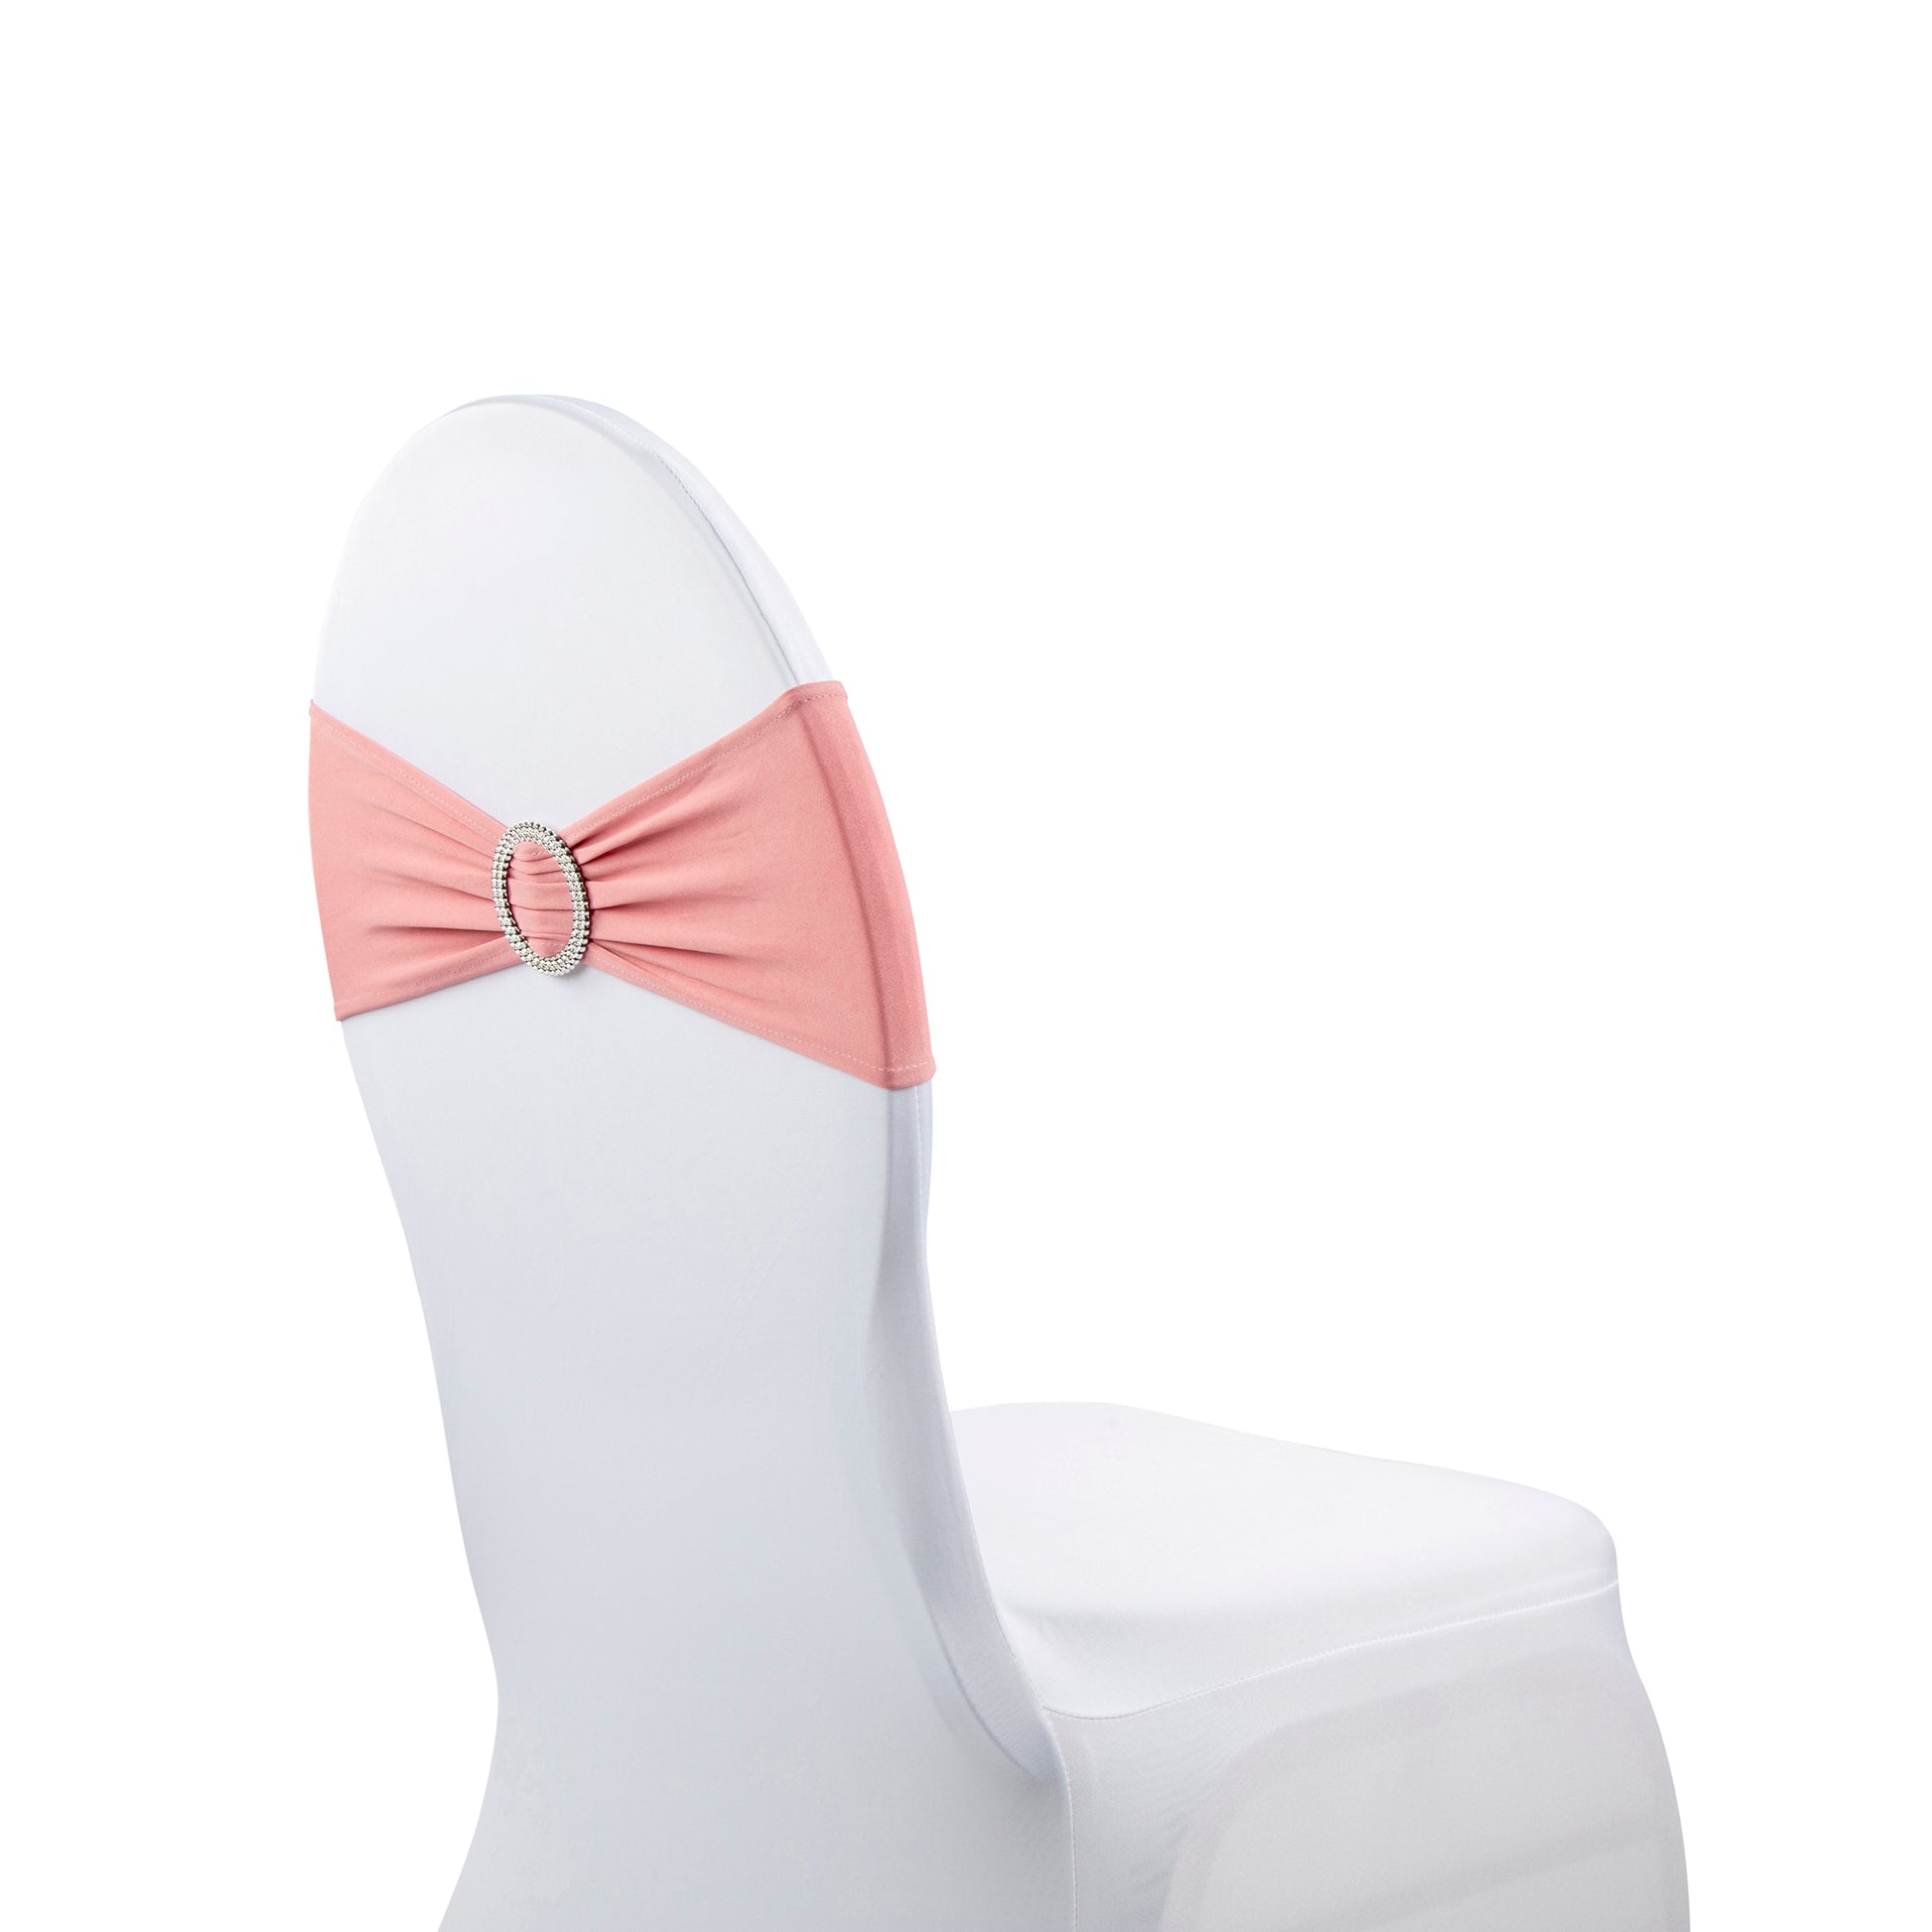 Buckle Spandex Stretch Chair Band - Dusty Rose/Mauve